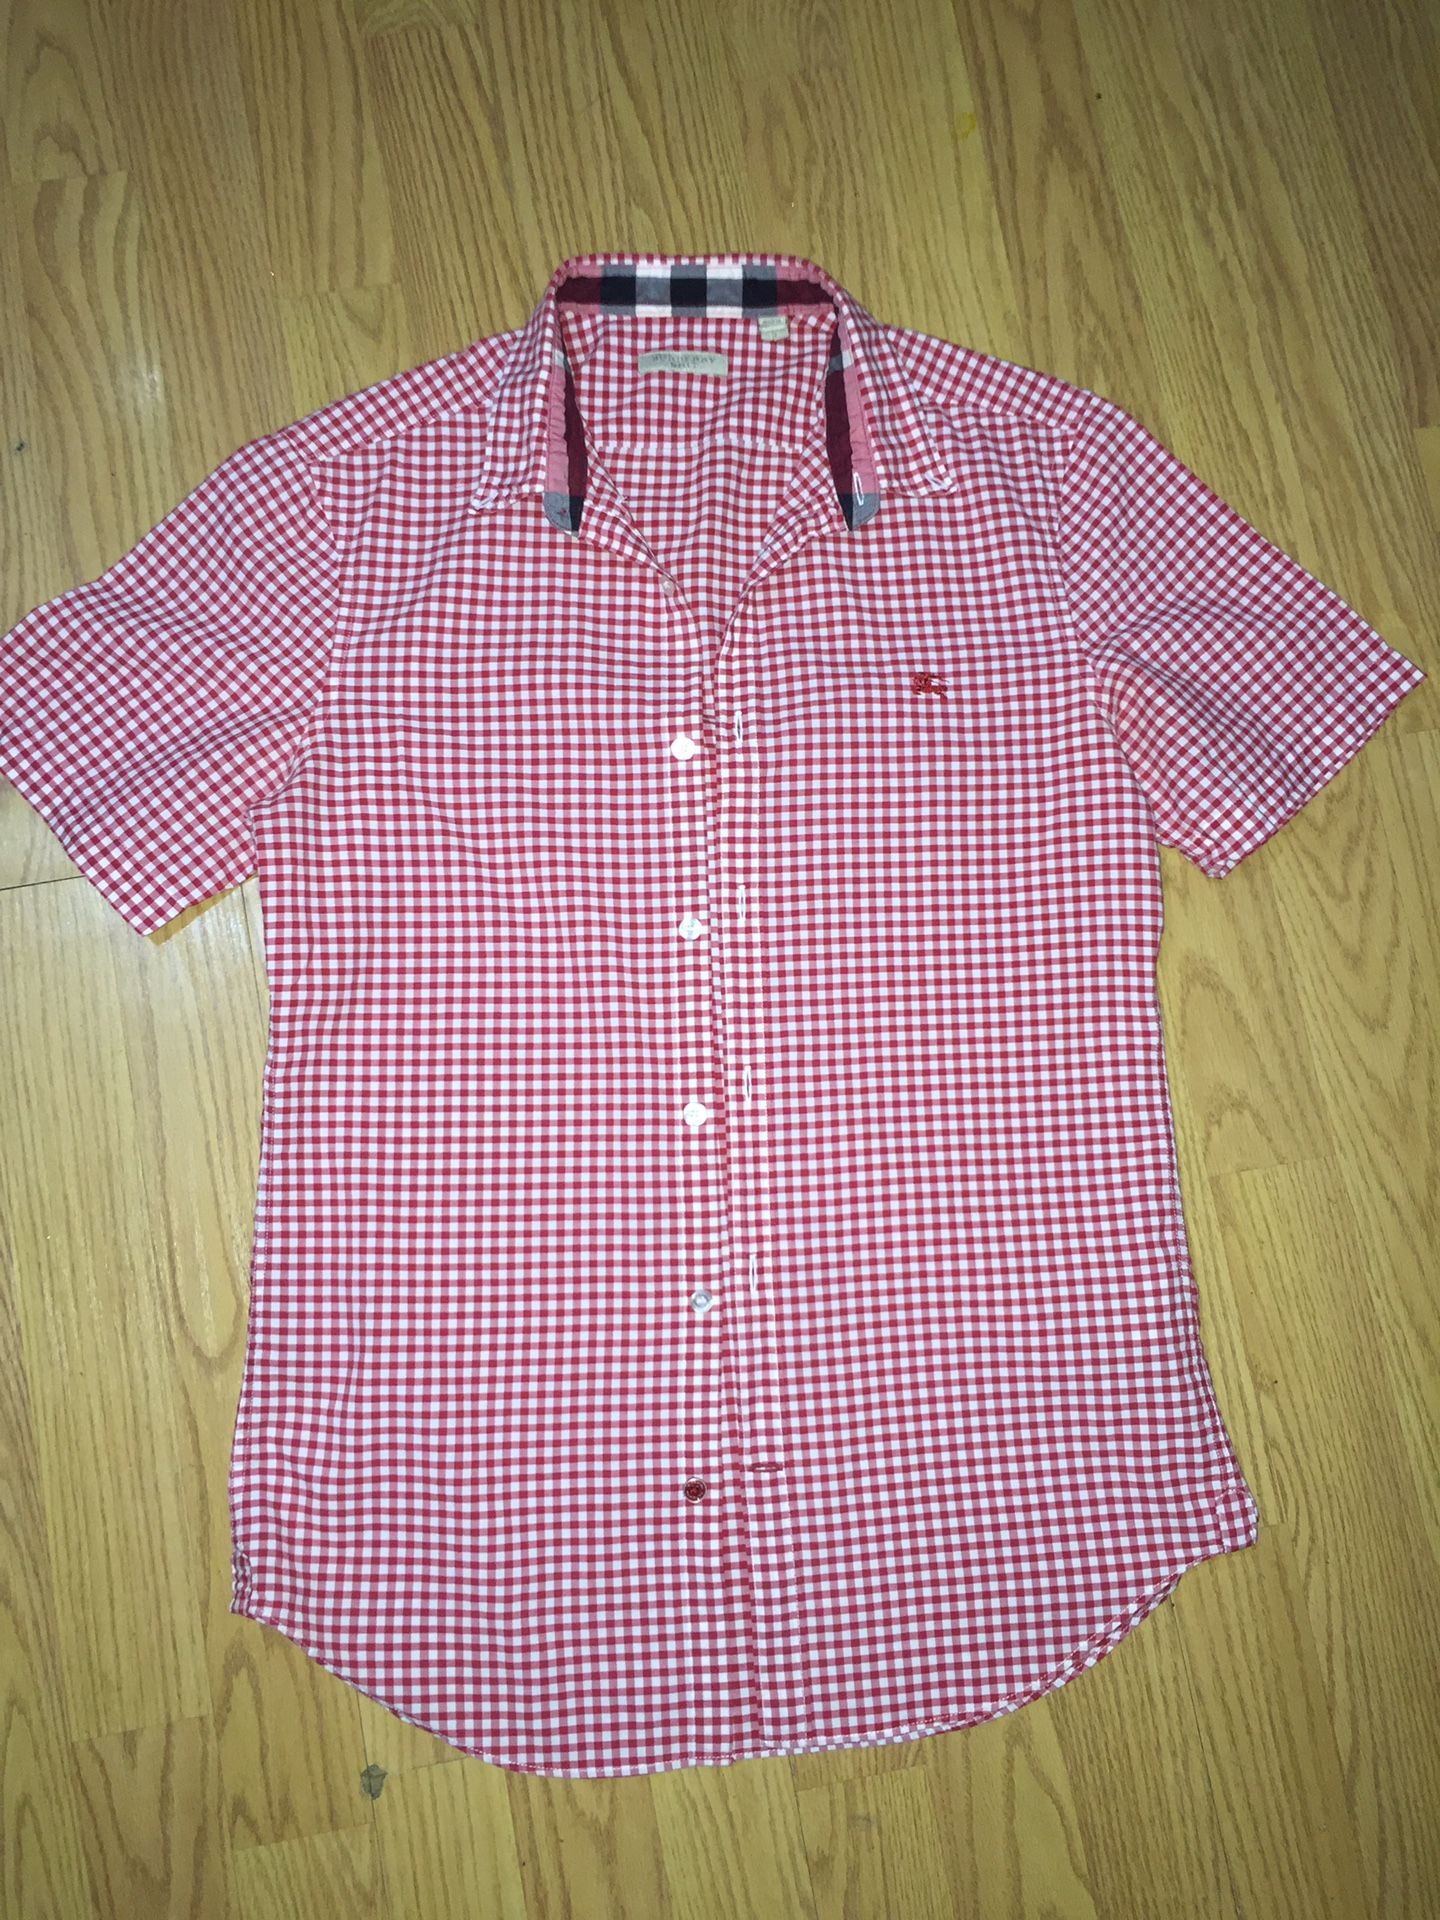 Authentic Burberry shirt size S